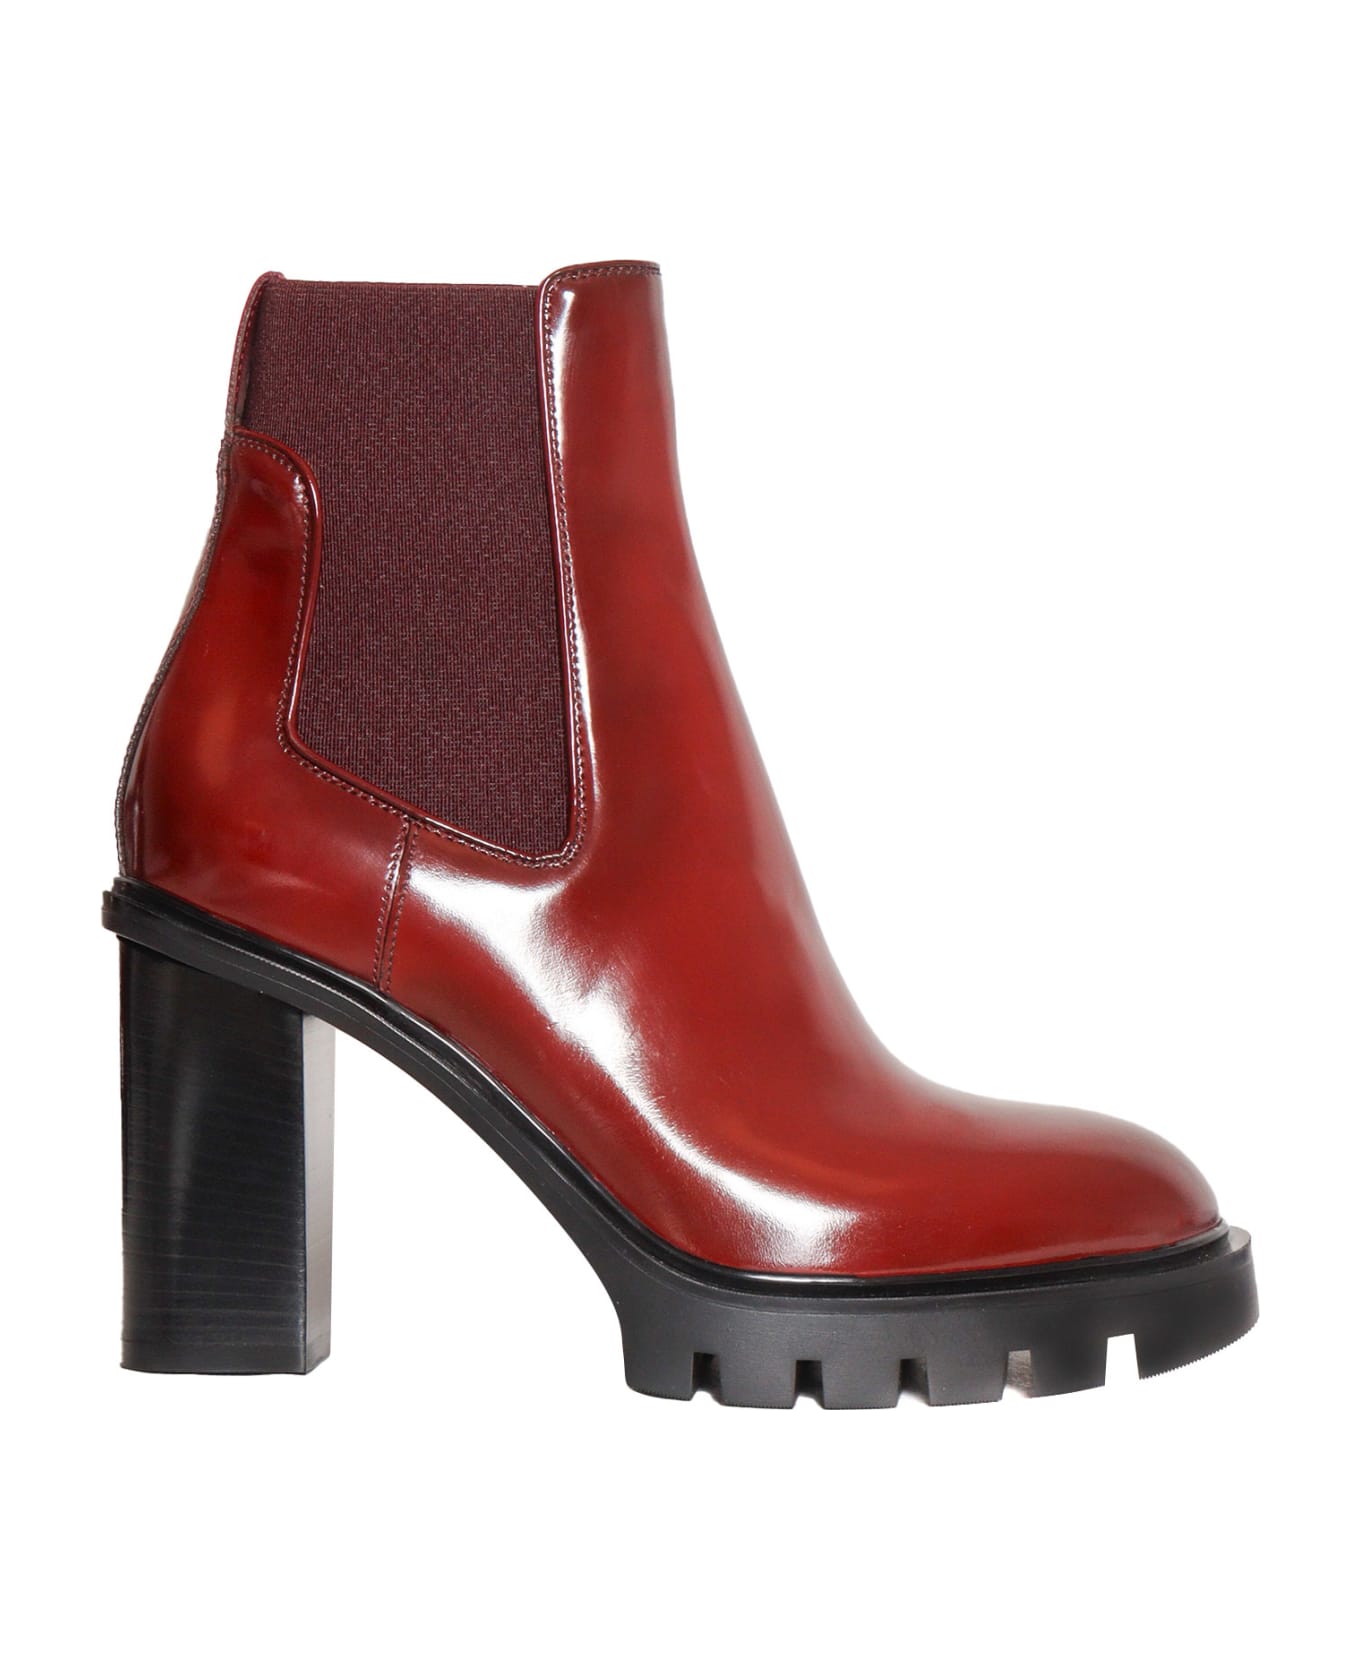 Santoni Ferry Ankle Boots - RED ブーツ